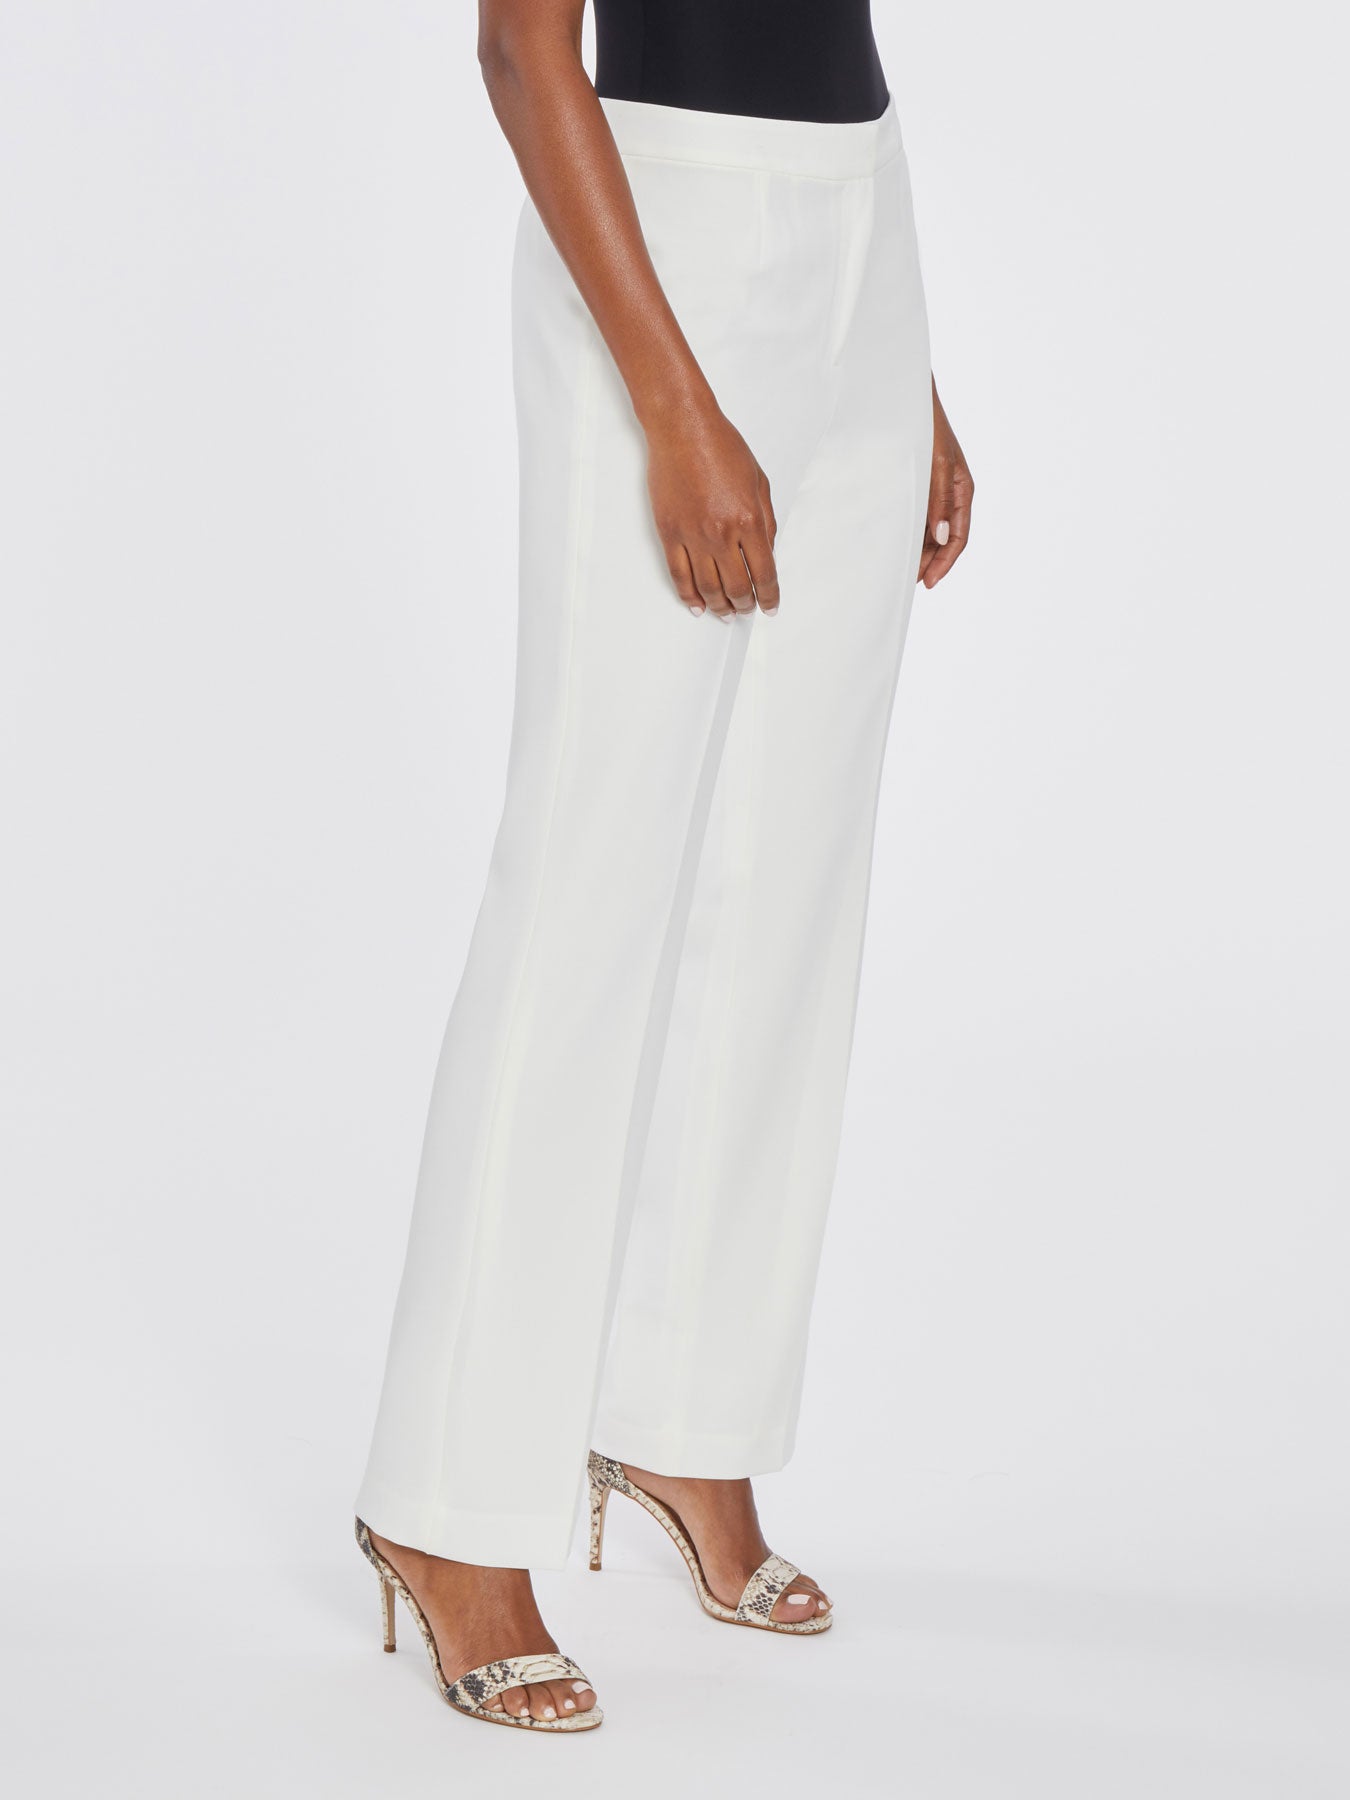 Icie Pants - High Waisted Tweed Wide Leg Pants in White & Black